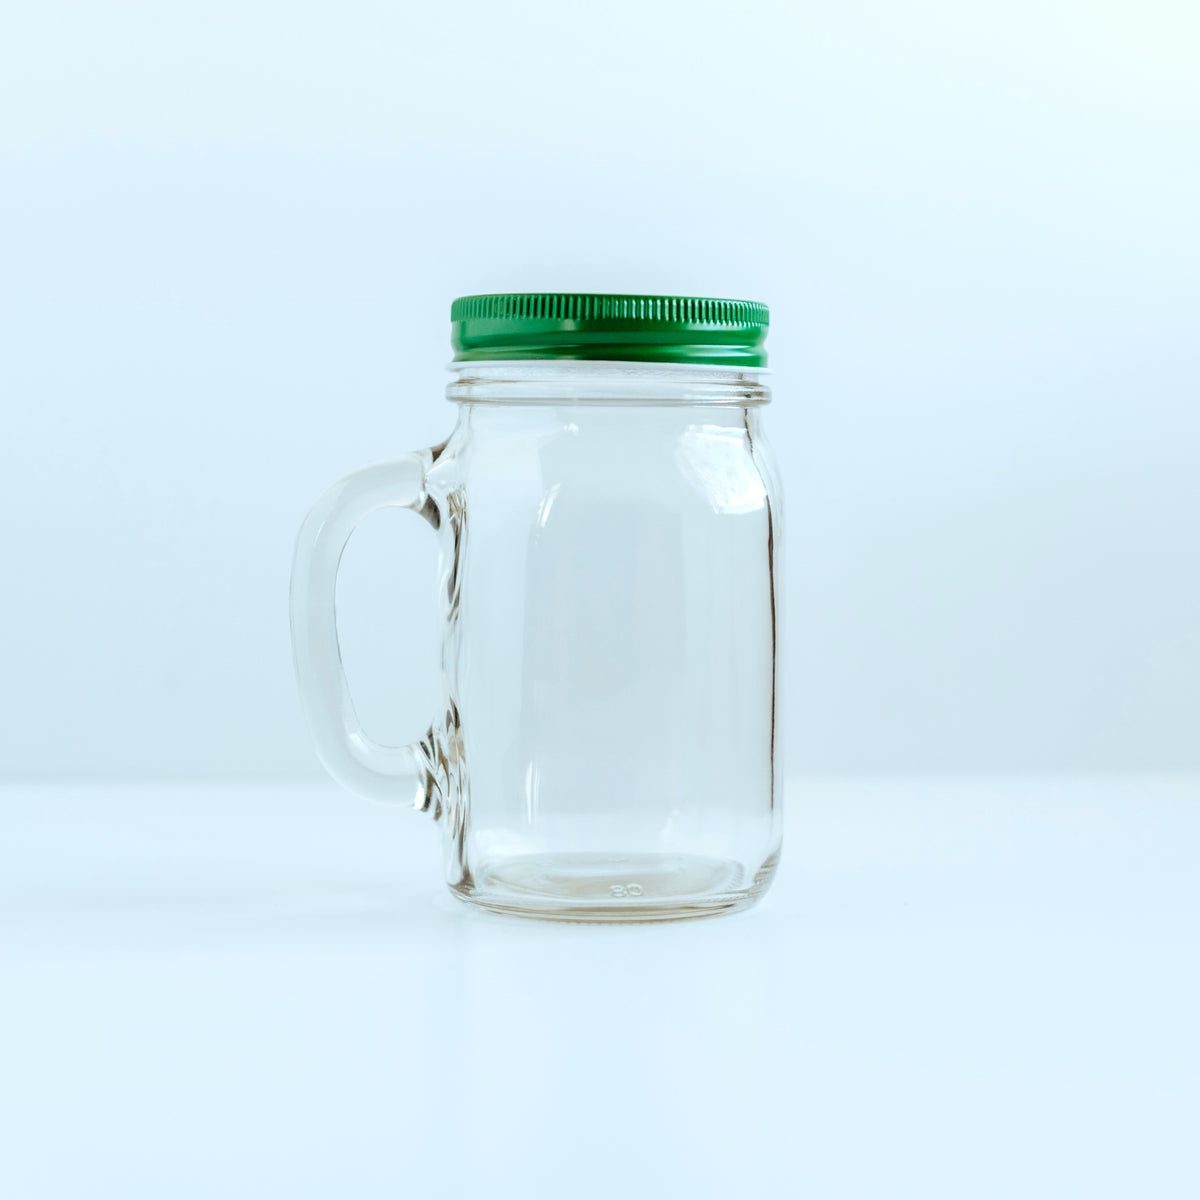 16oz. Glass Mason Jar with Lid - Versatile and Durable Container for Food Storage and Crafts | Buy Online